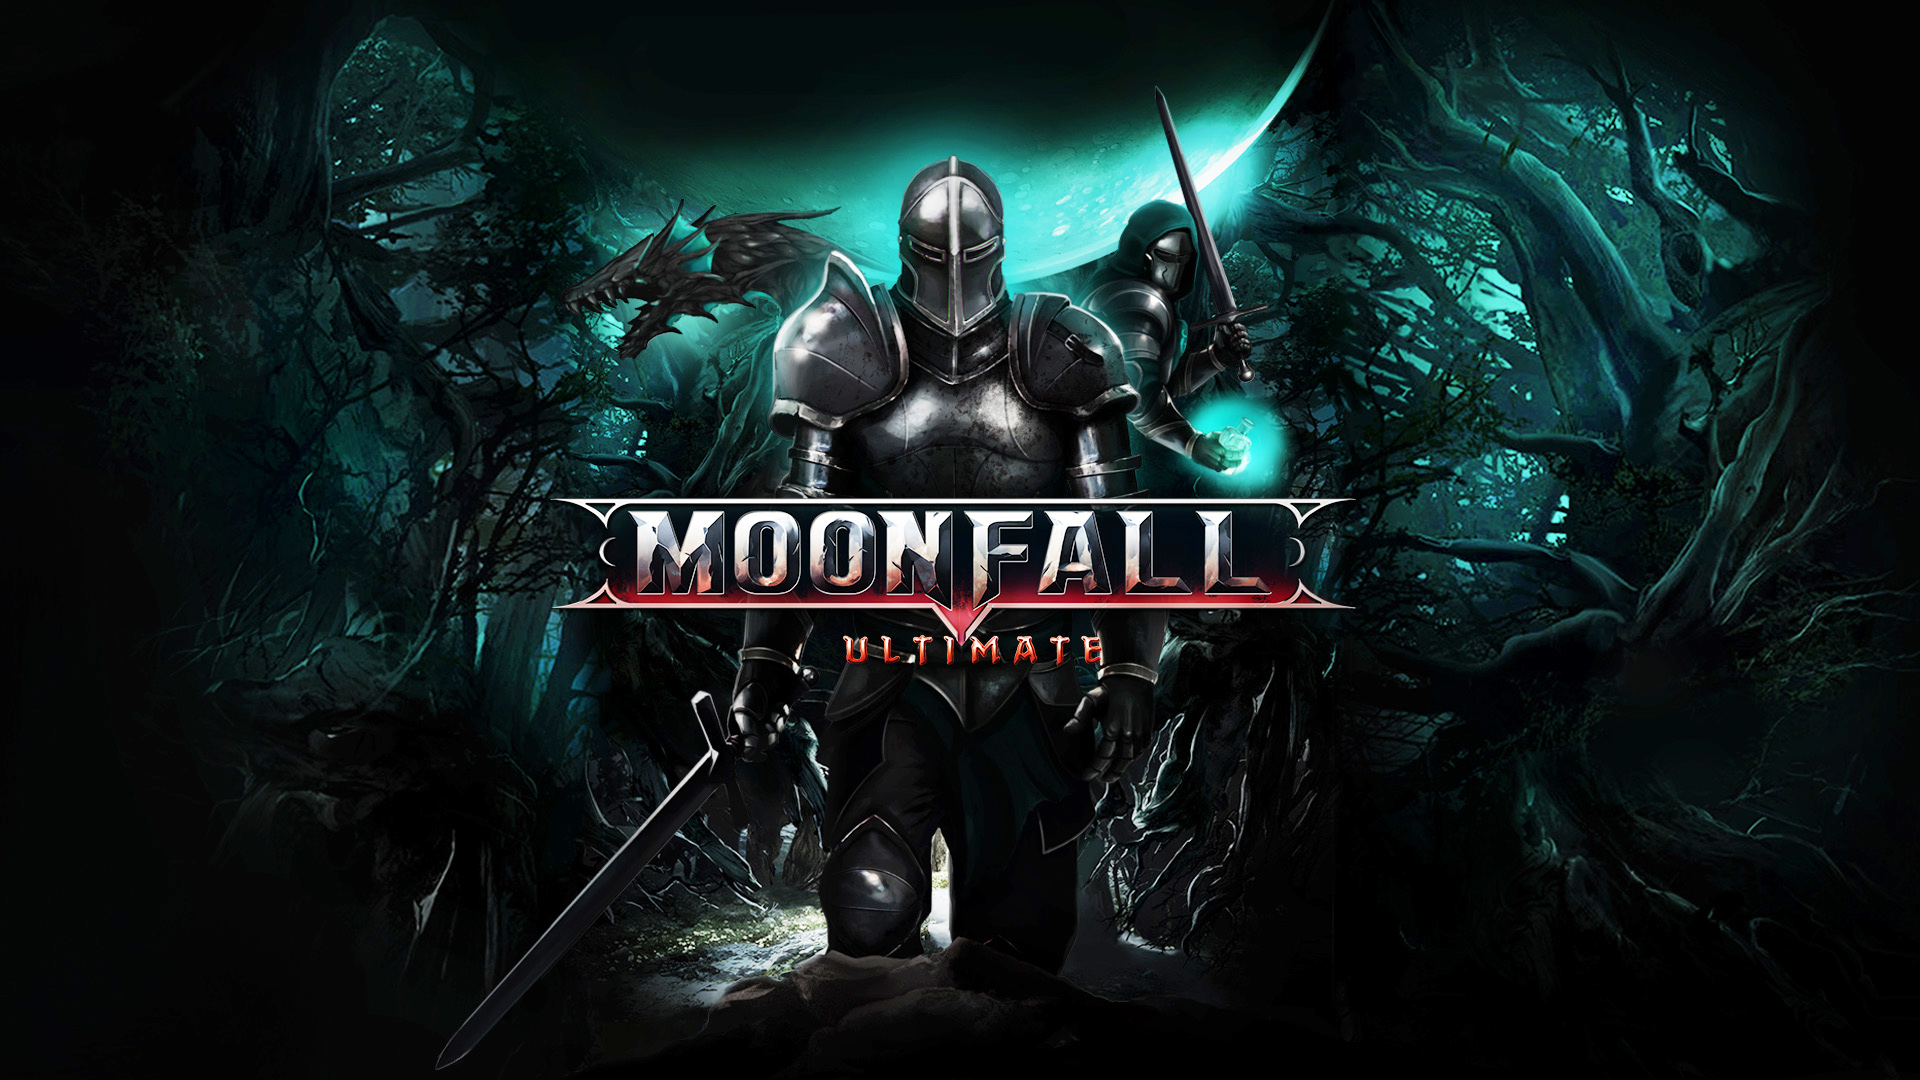 Moonfall ultimate nintendo switch review